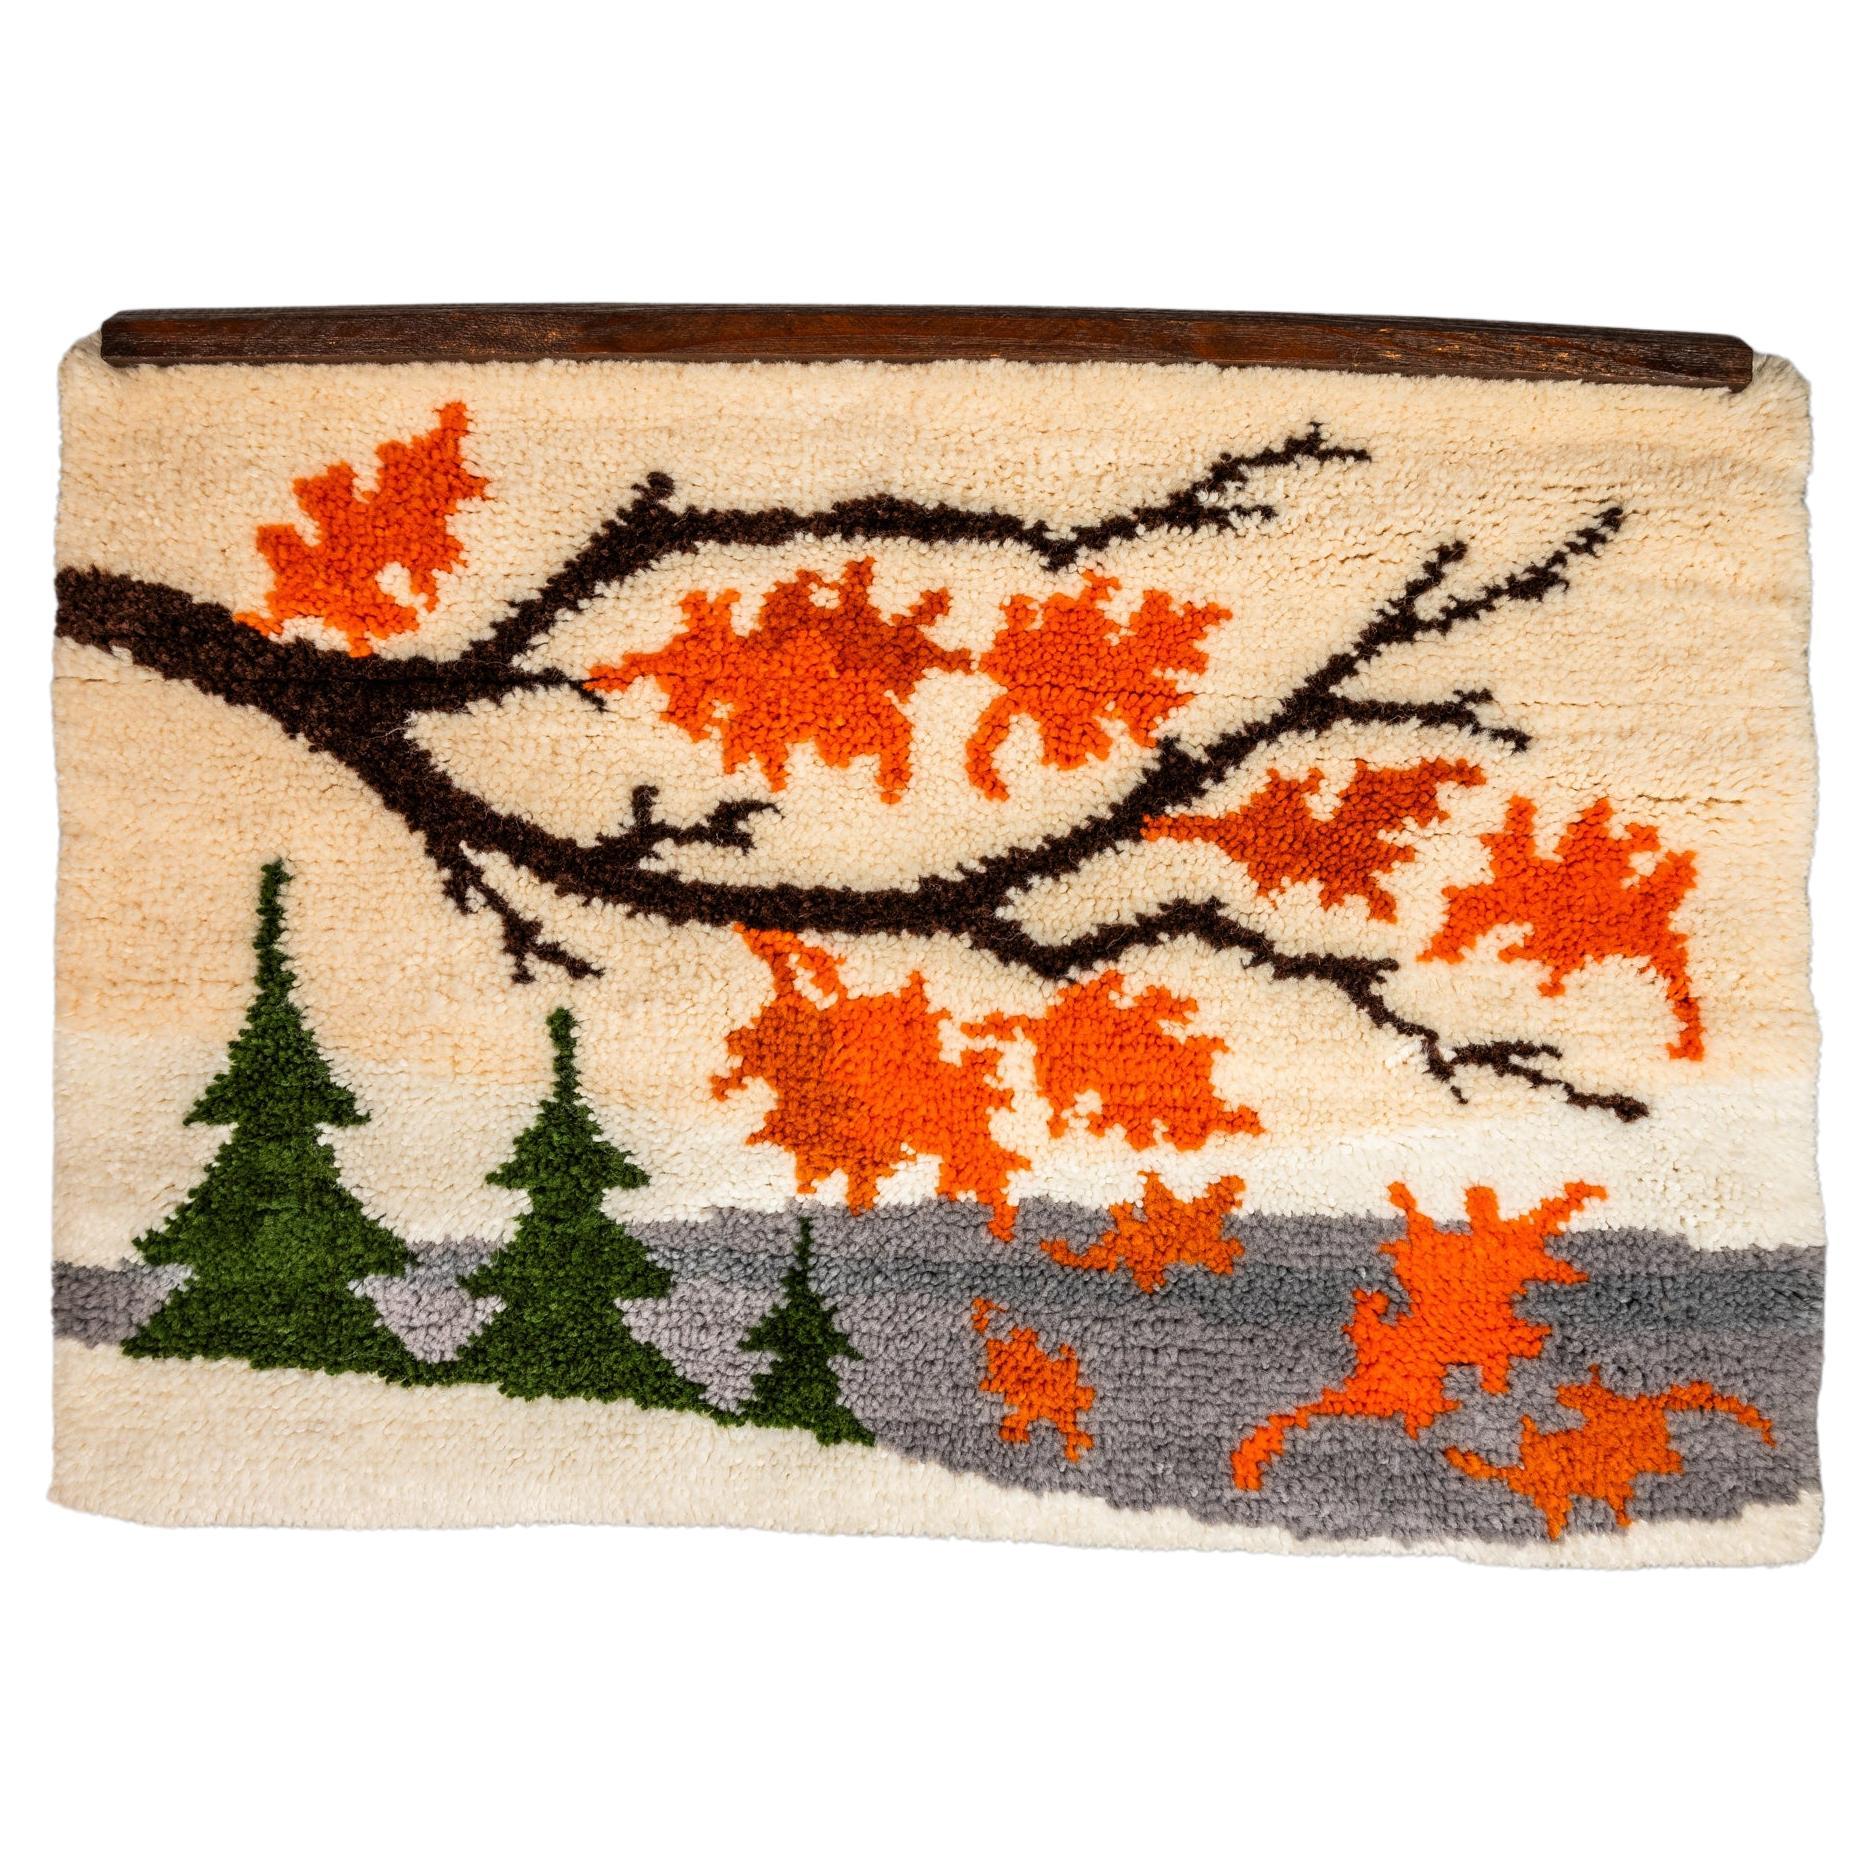 Charming Mid-Century Modern Hand-Made Latch Hook Tapestry / Wall Art, USA, 1970s For Sale